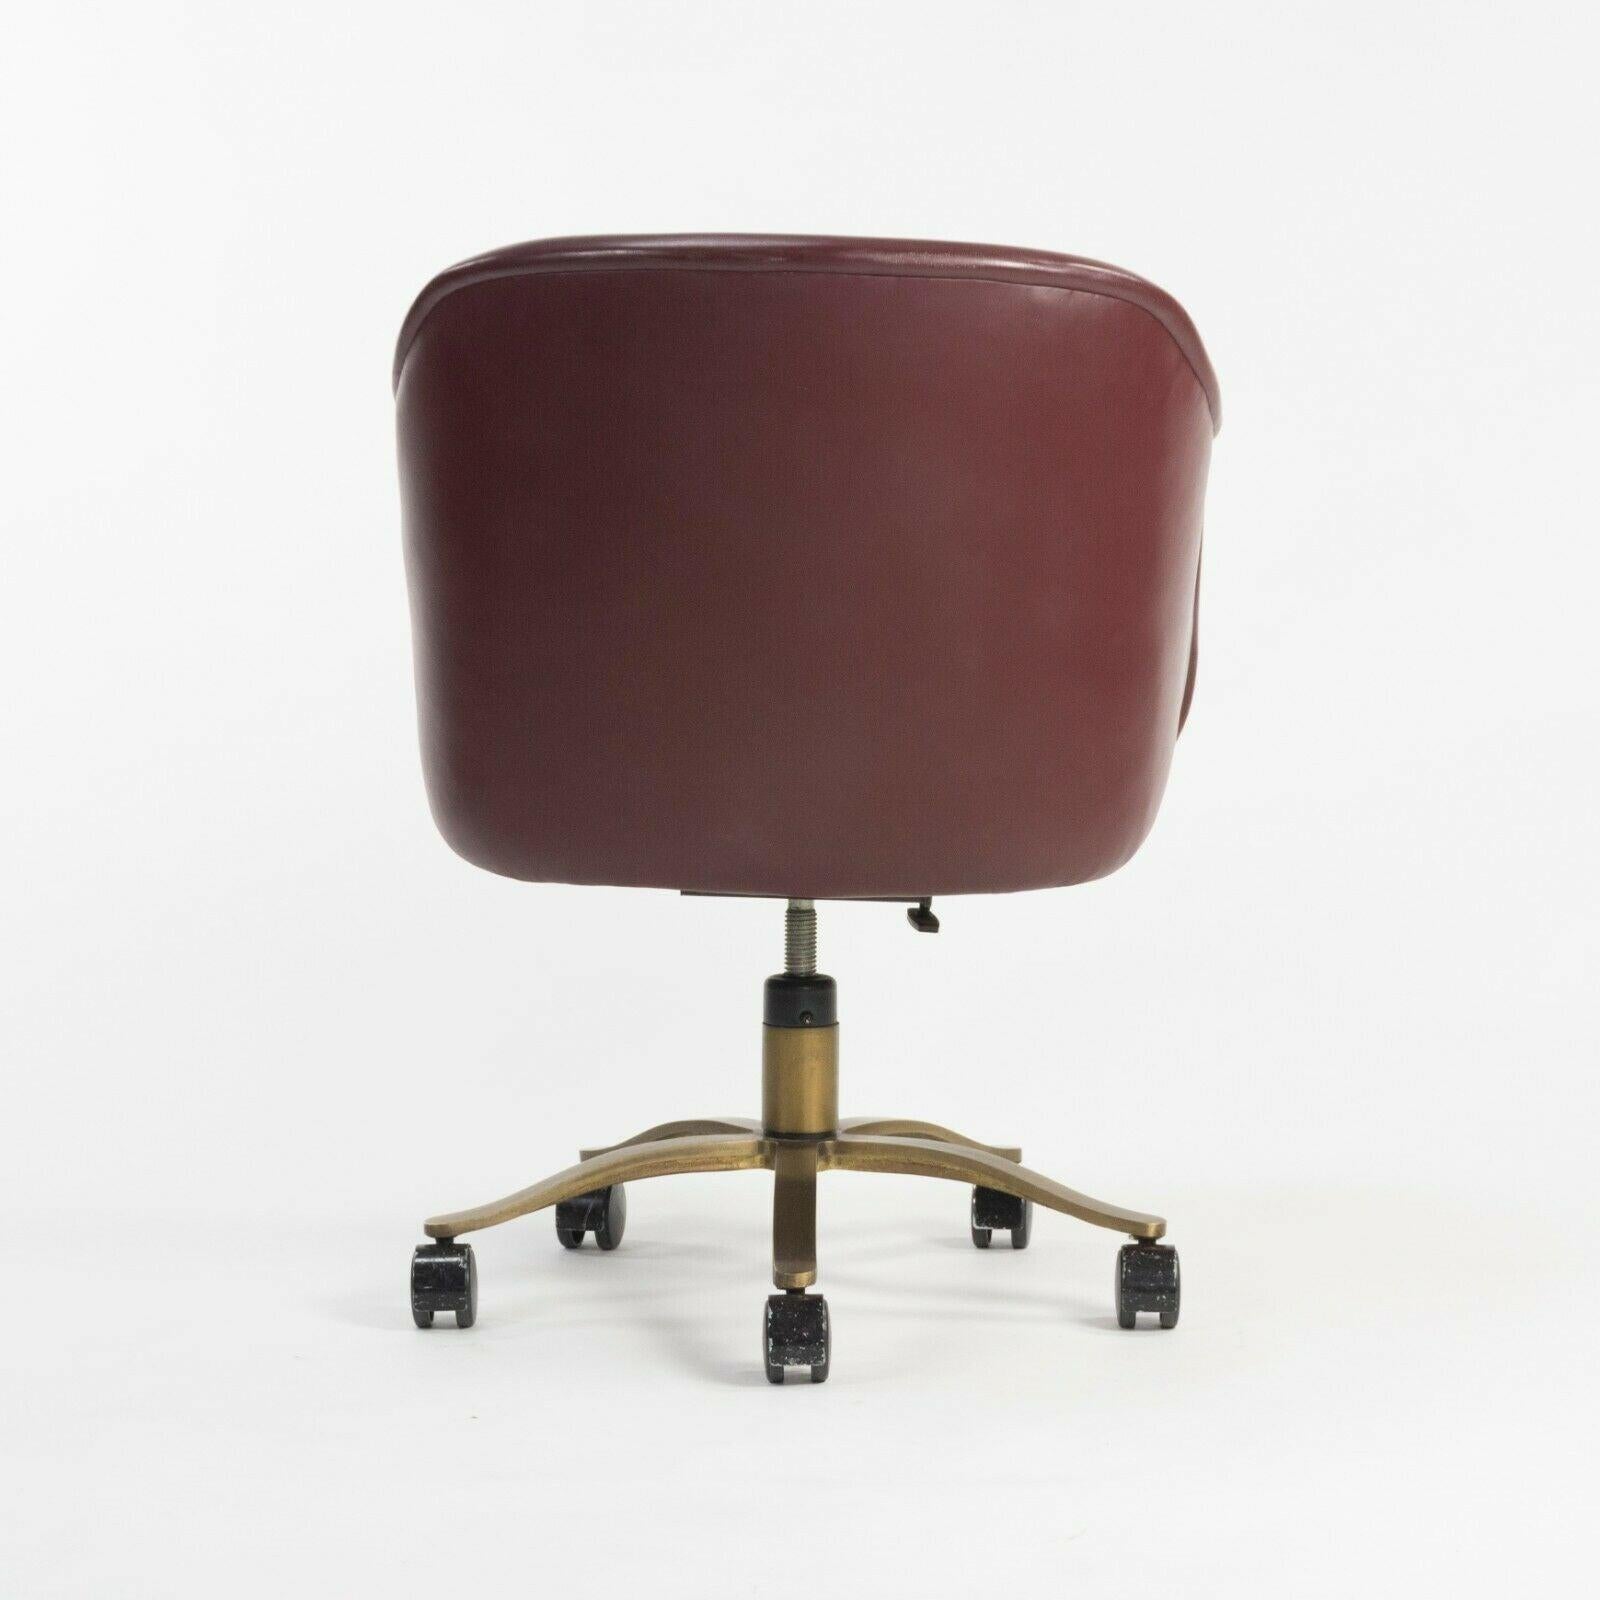 Nicos Zographos Alpha Bucket Desk Chairs w/ Bronze Base Cordovan Leather In Good Condition For Sale In Philadelphia, PA